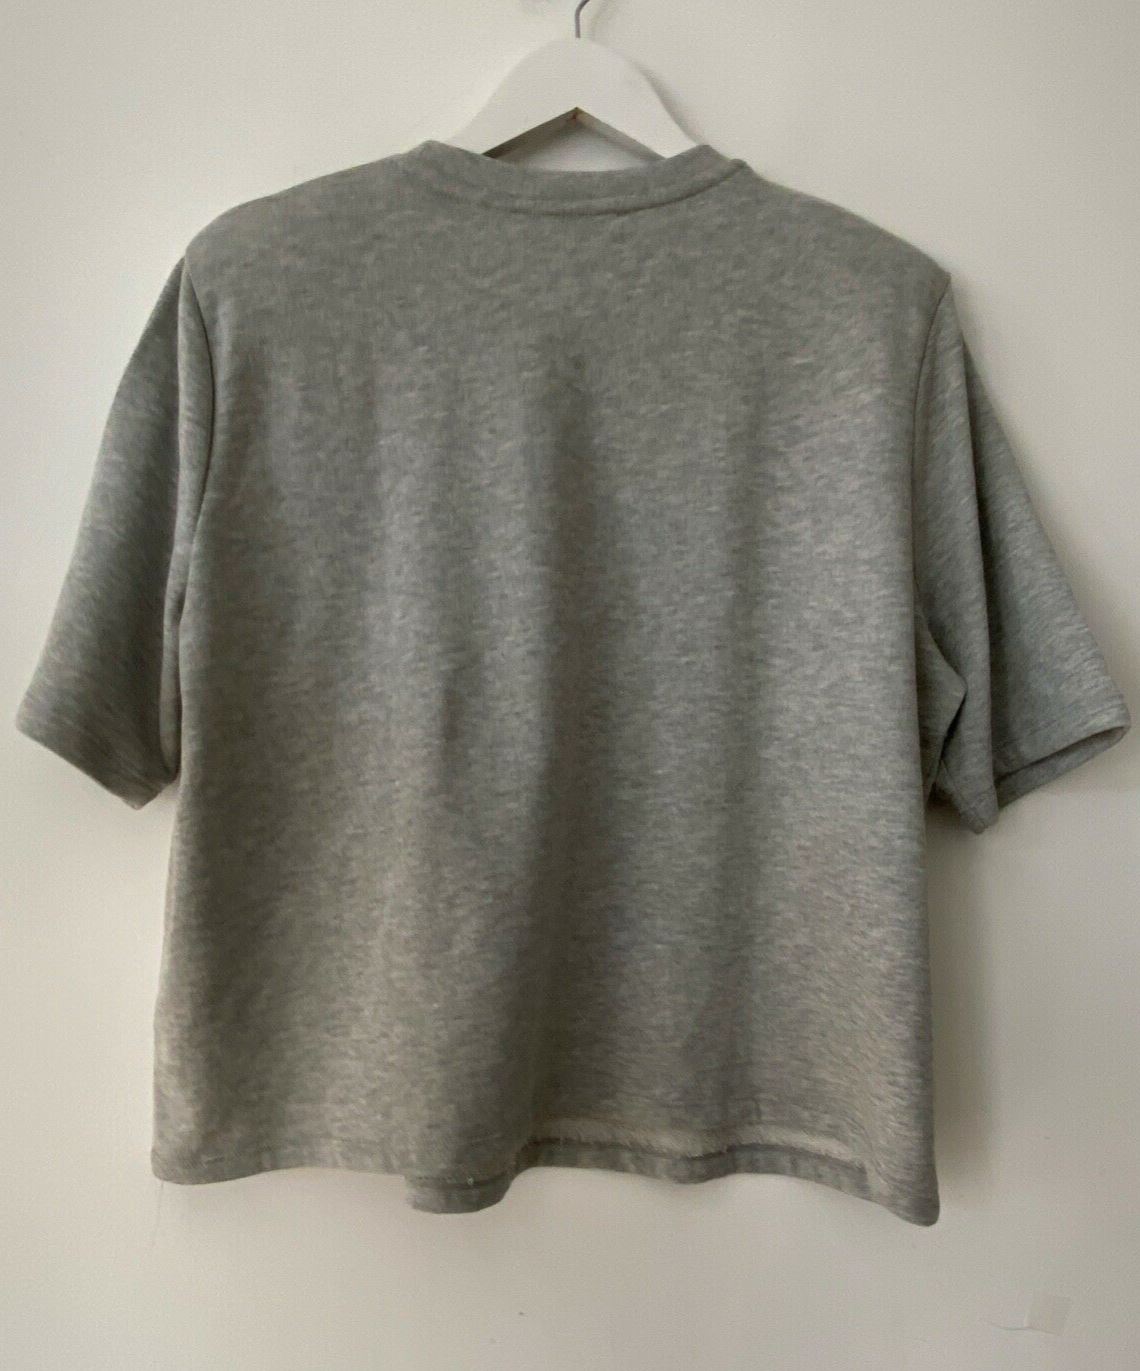 VERY Grey Short Sleeve Sweet Top Size 18 Boxy - Beagle Boutique Fashion Outlet